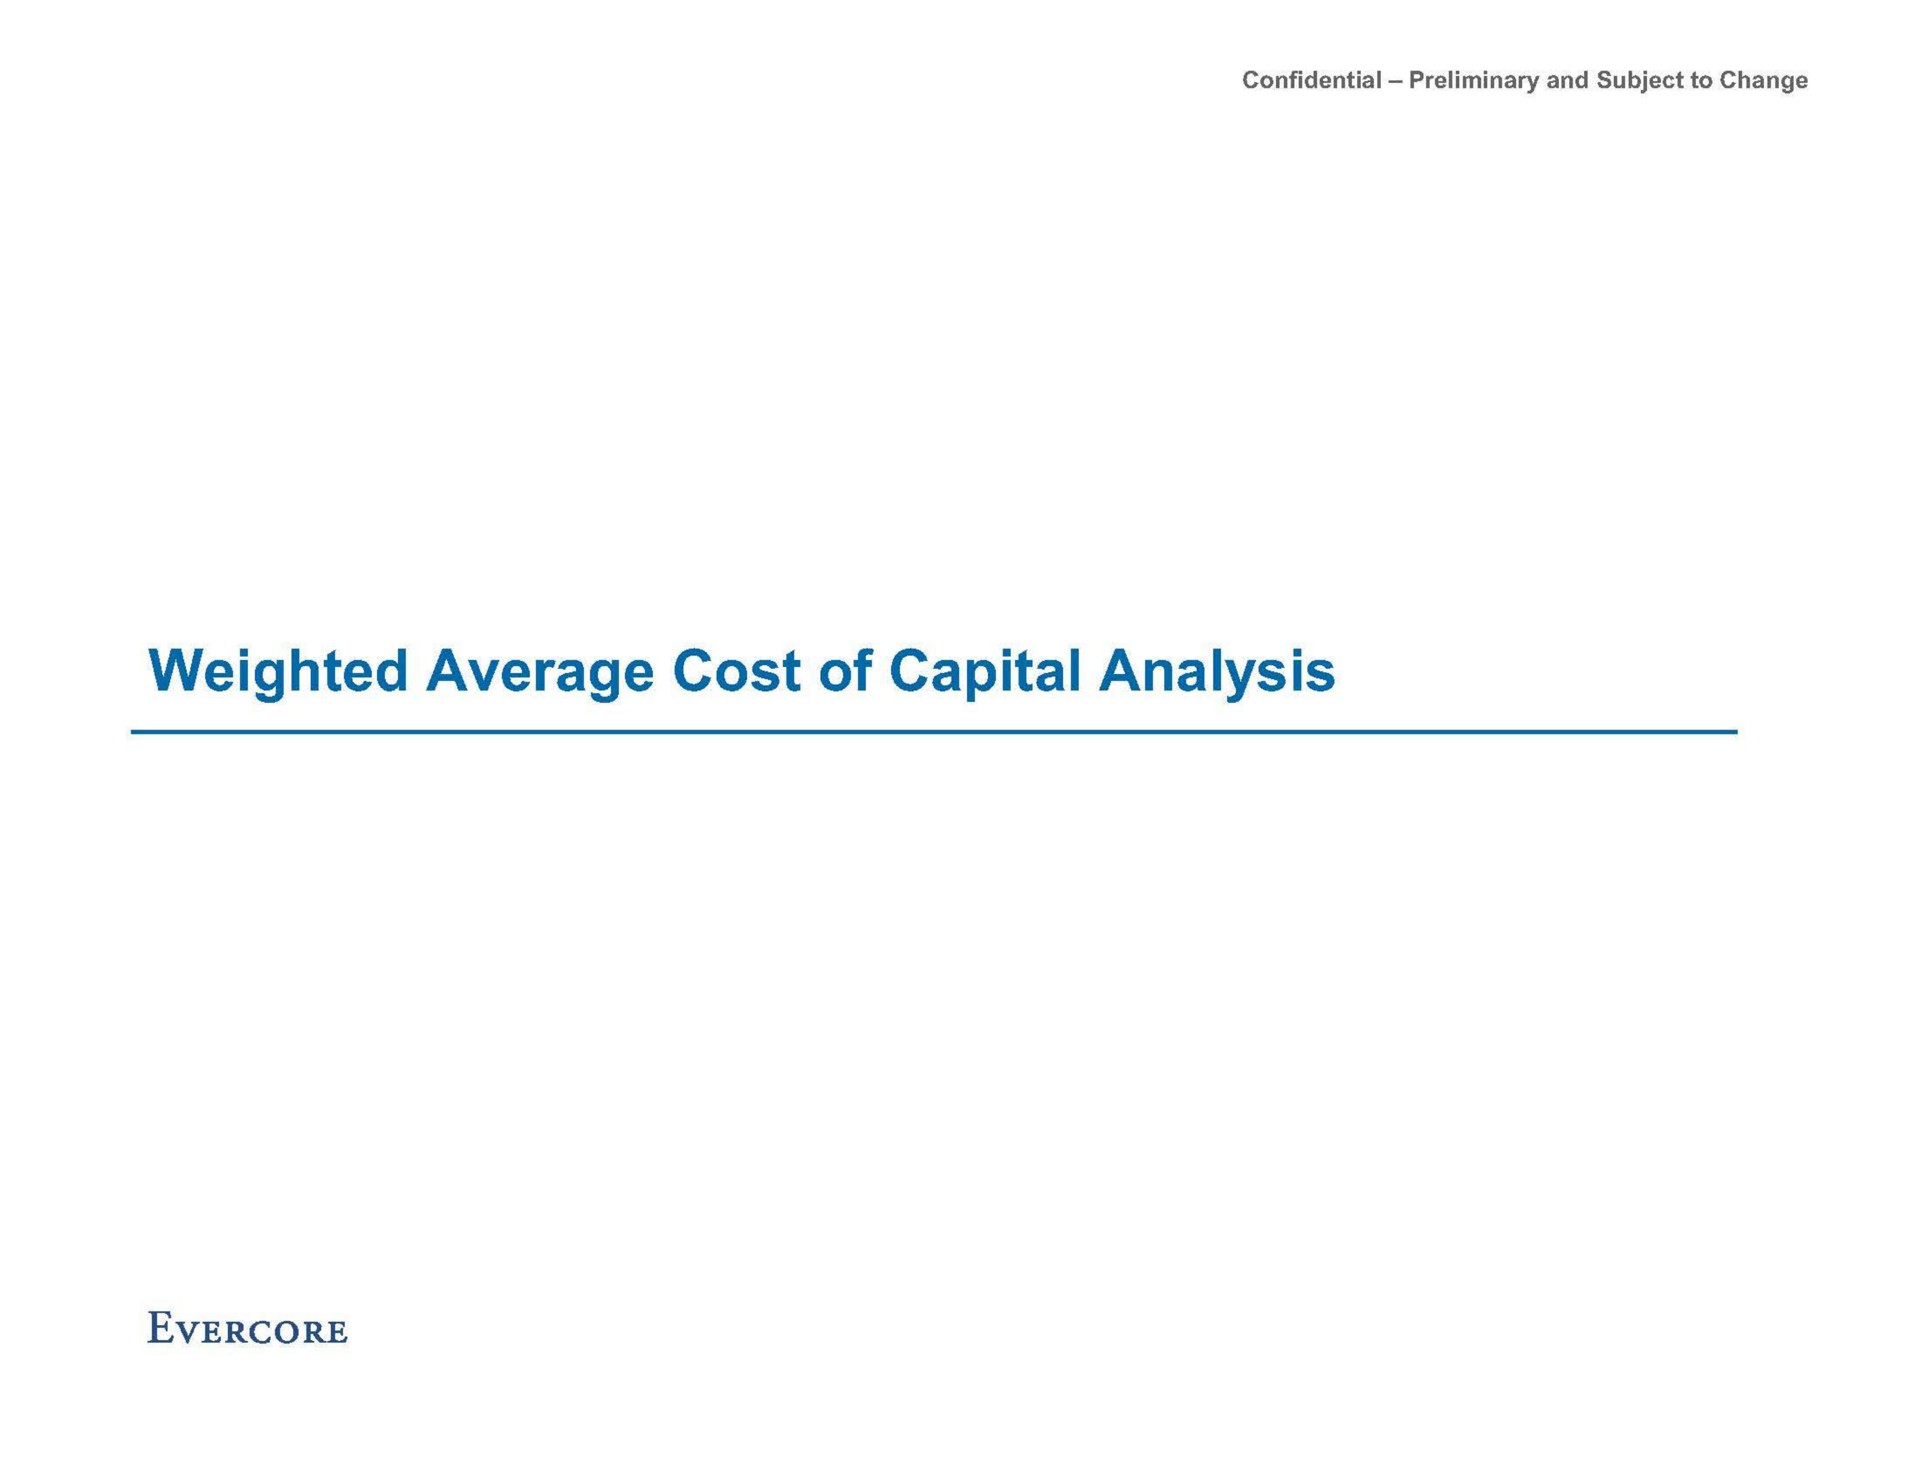 weighted average cost of capital analysis | Evercore